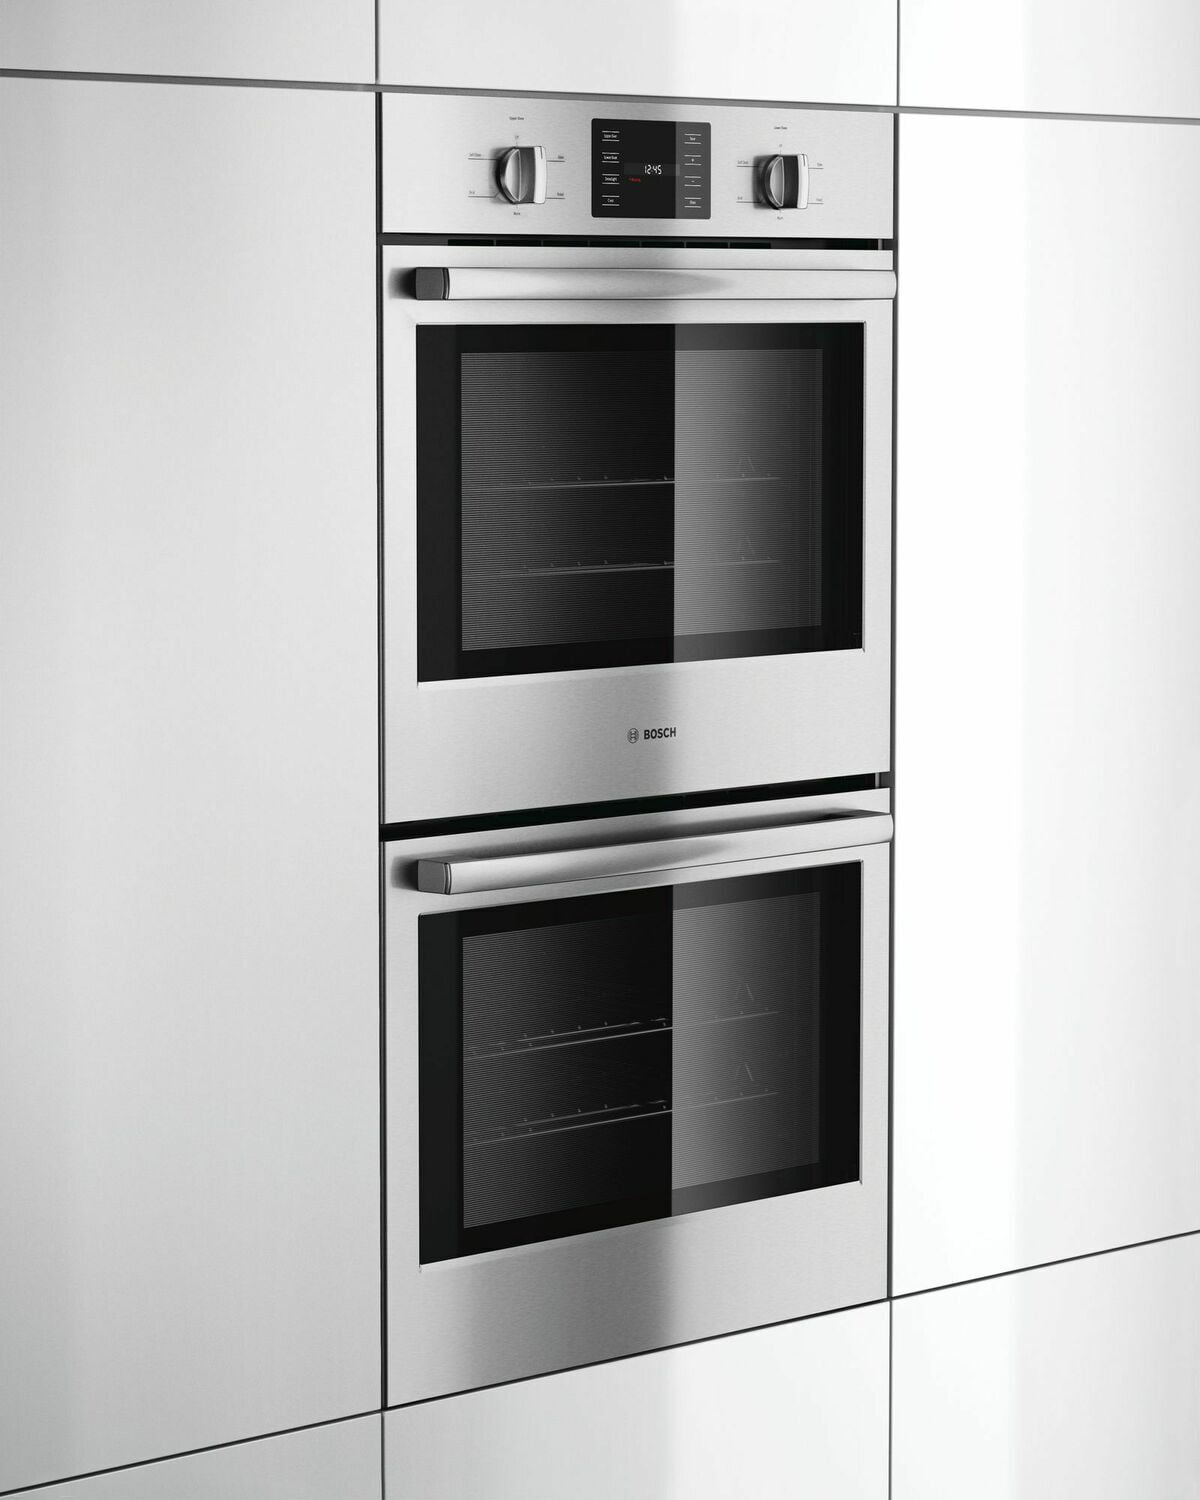 Bosch HBL5551UC 500 Series, 30", Double Wall Oven, Ss, Thermal/Thermal, Knob Control